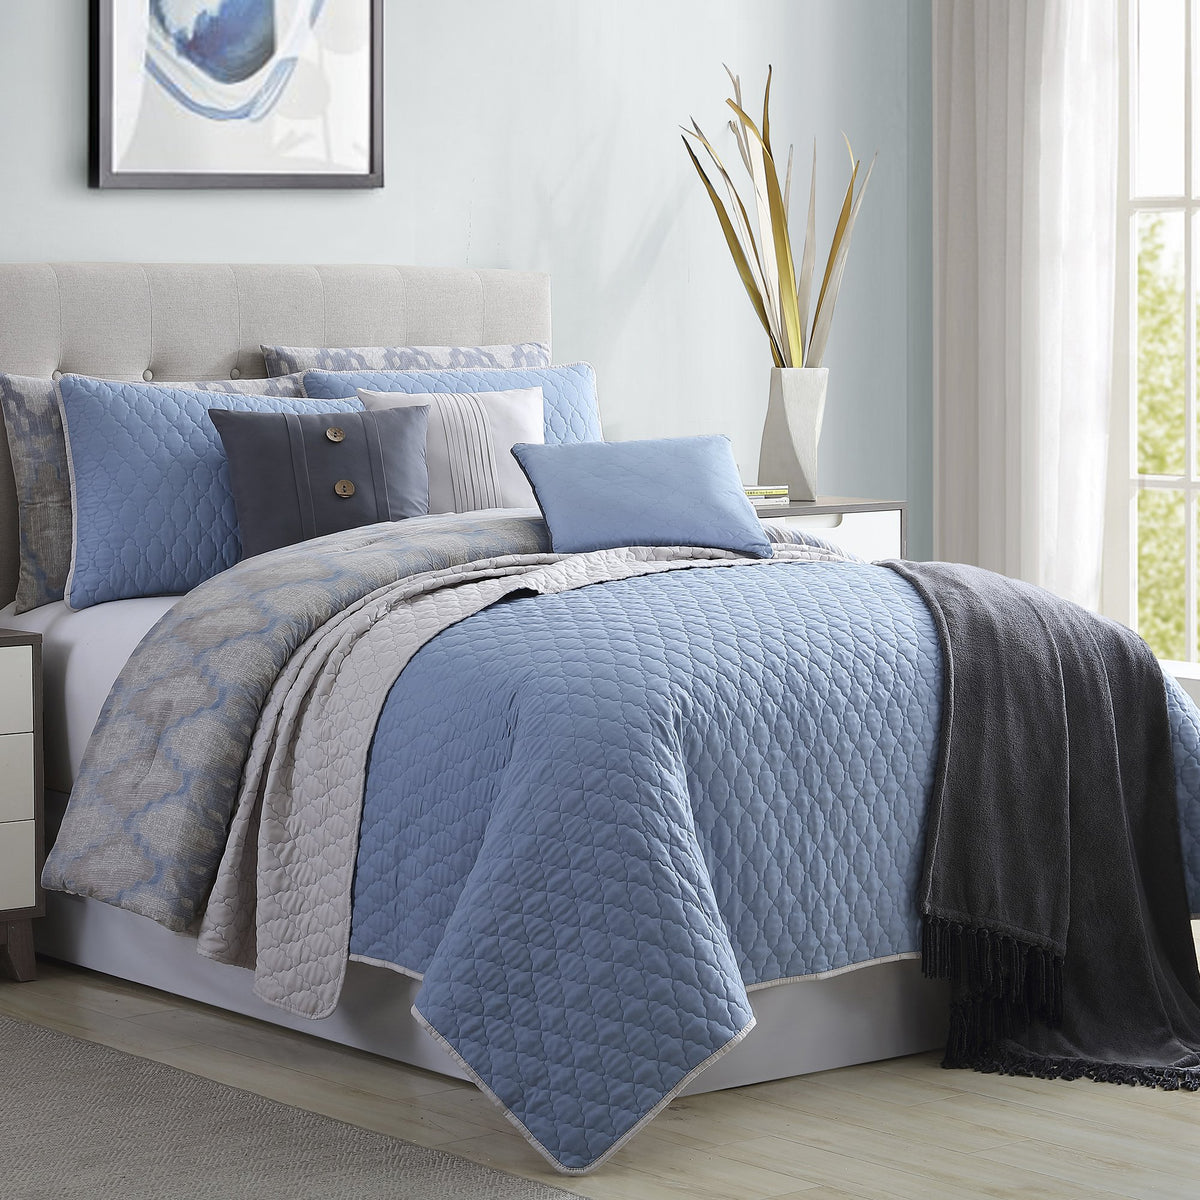 Andria 10 Piece King Size Comforter and Coverlet Set , Blue and Gray - BM202800